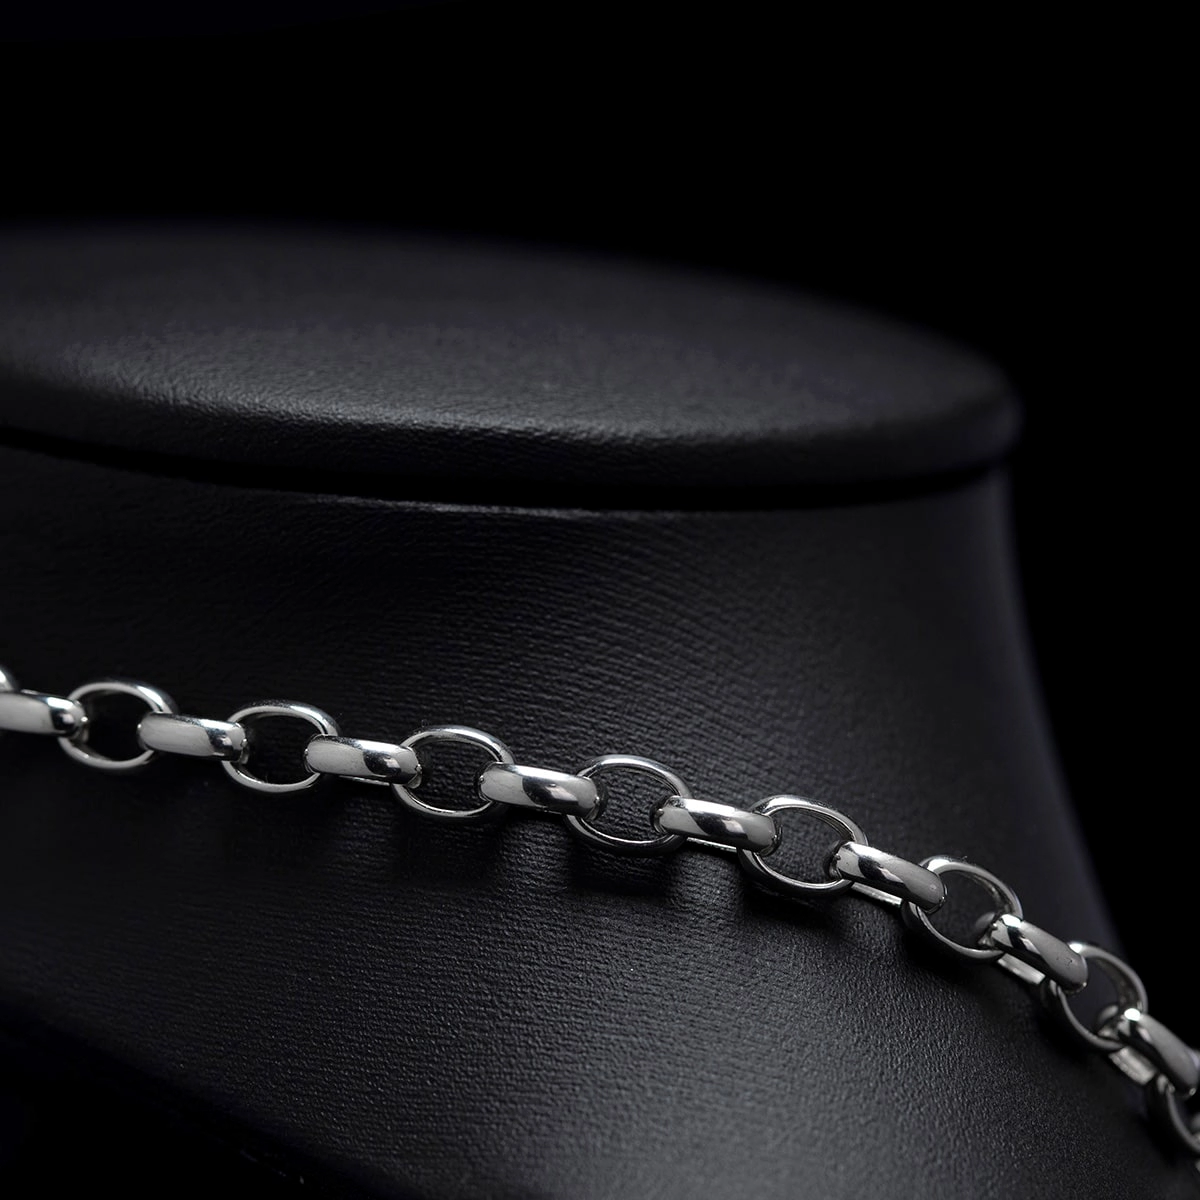 A 5mm men's platinum rolo link chain necklace with a durable clasp